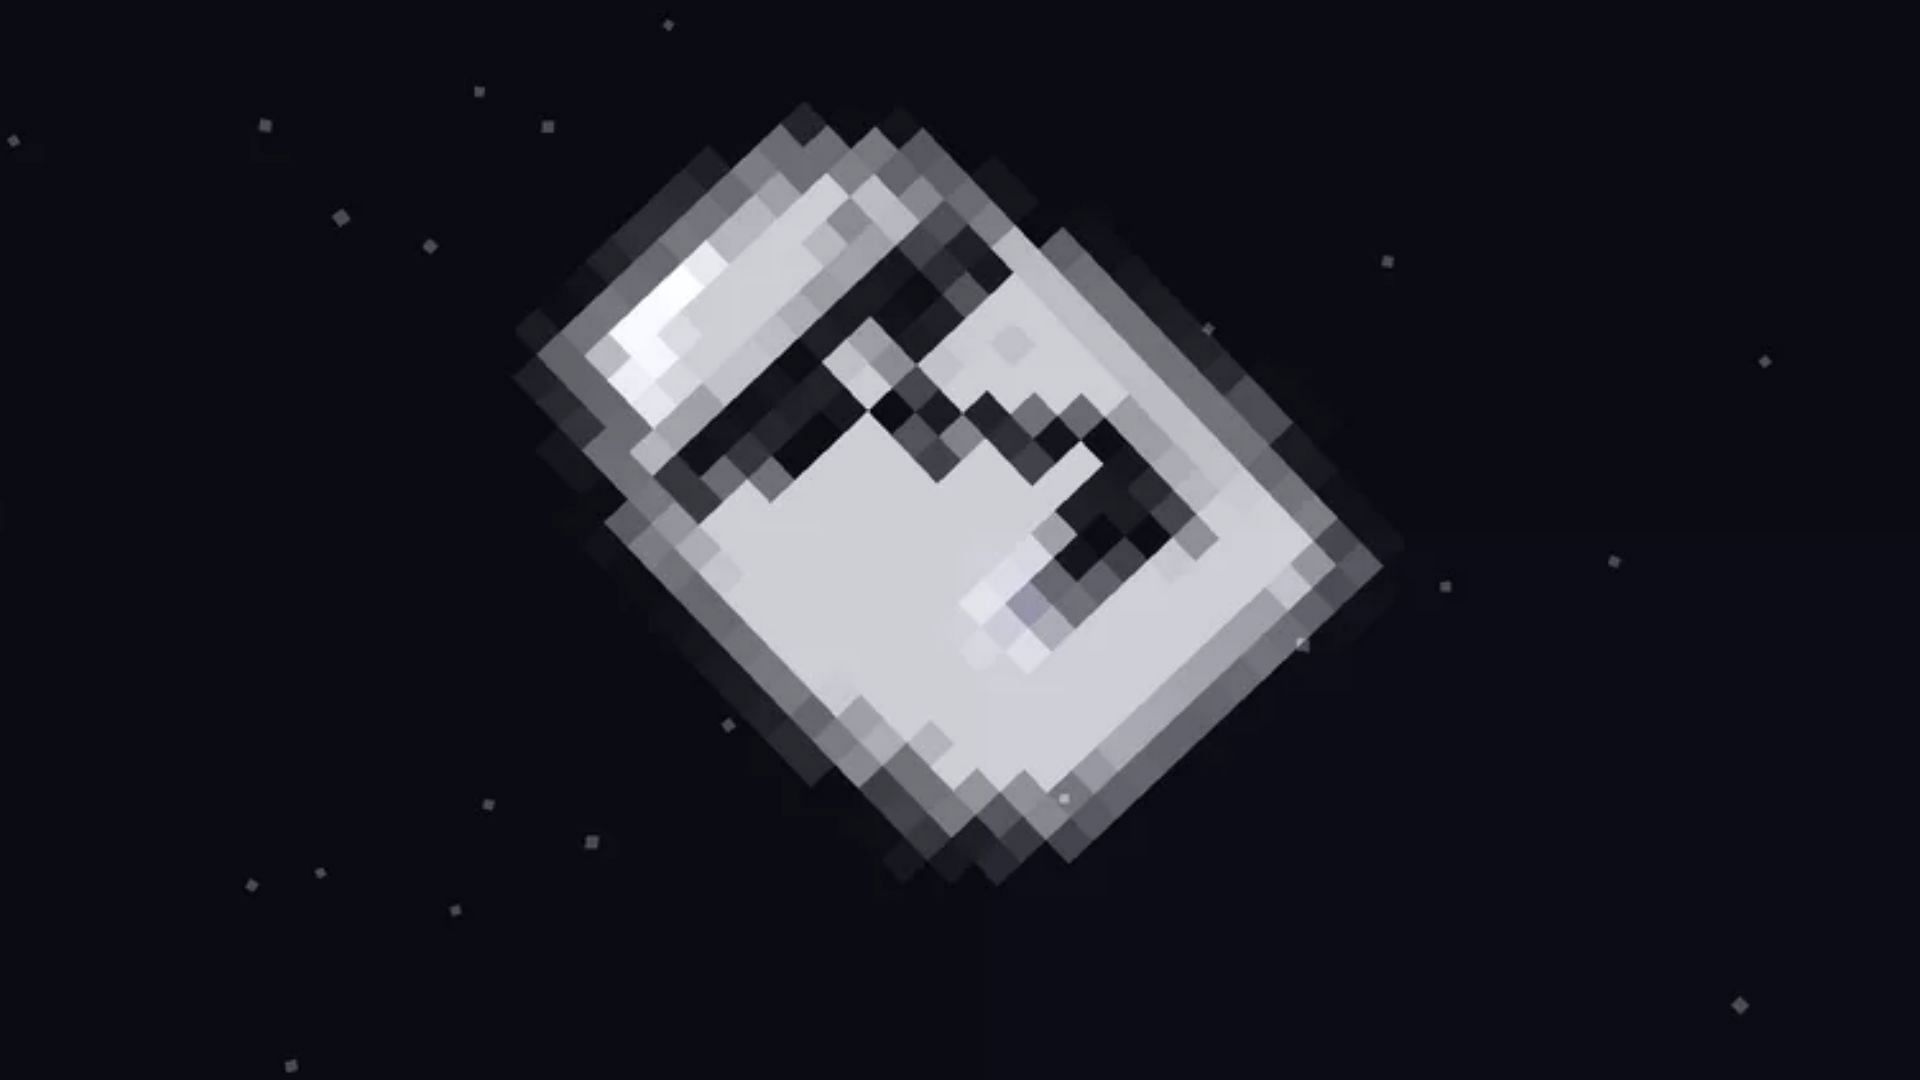 Chad Moyai is simply a meme texture pack that changes the sun and moon textures to Moyai emoji (Image via Minecraft Forum)